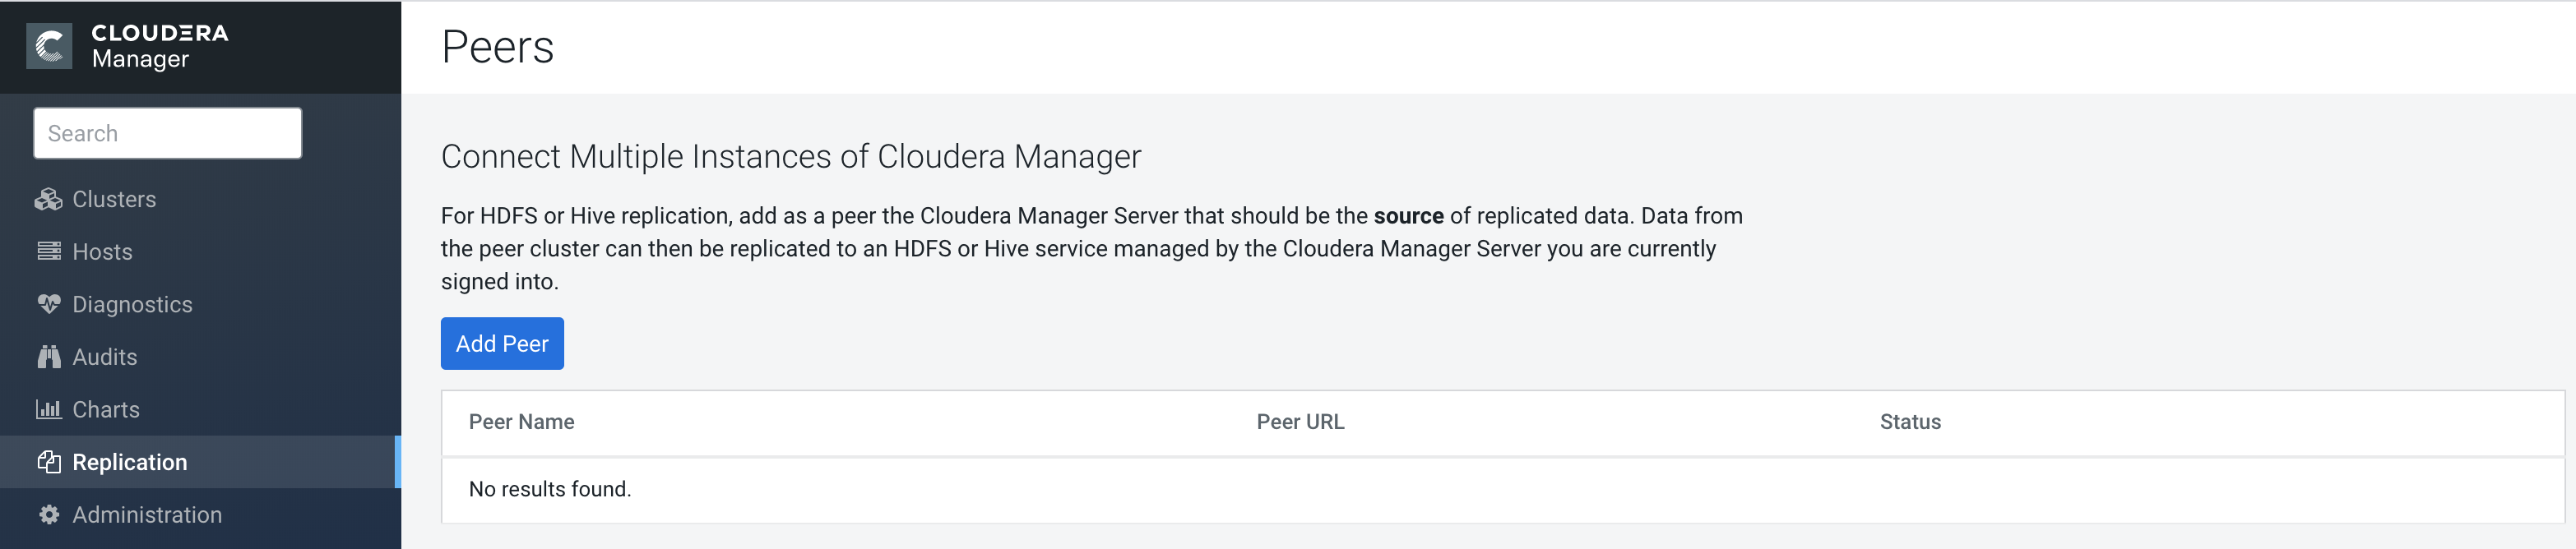 The sample image shows the Peers page where you can add a source Cloudera Manager instance as a peer. The page also lists the available peers which were added previously.